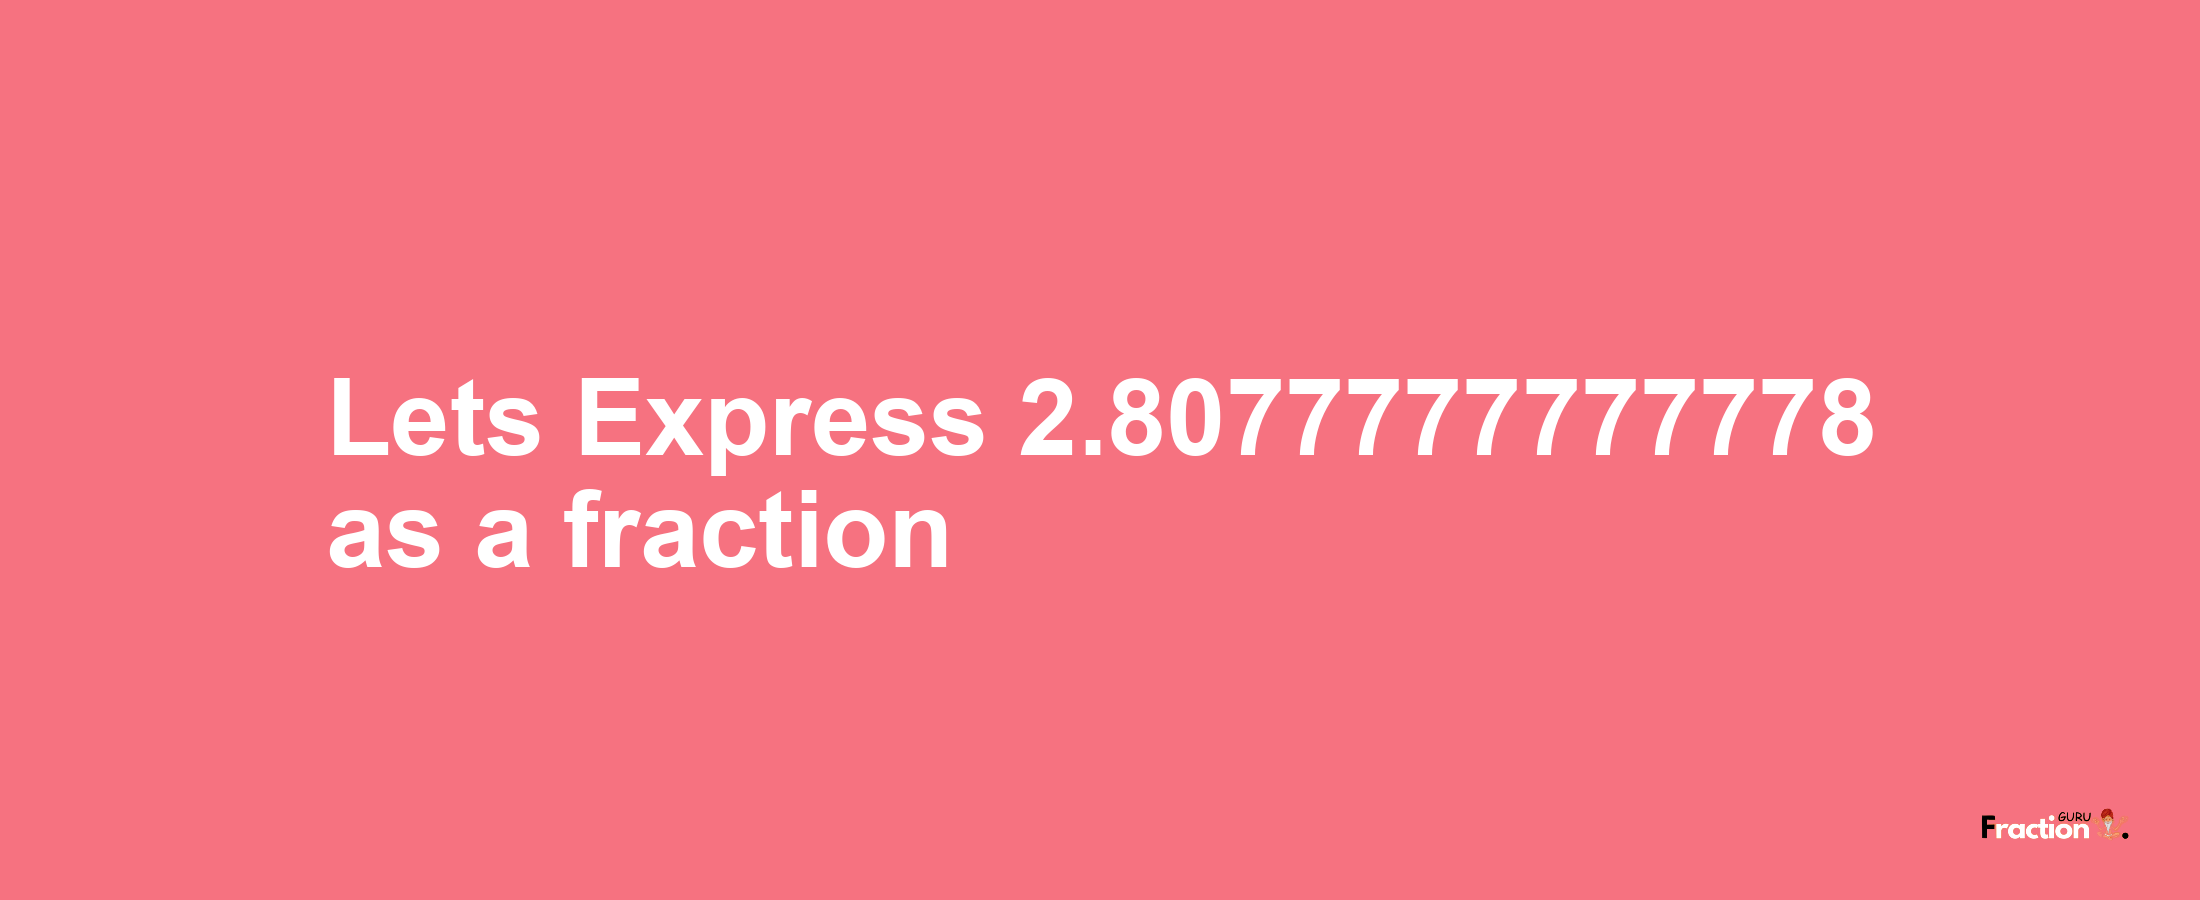 Lets Express 2.8077777777778 as afraction